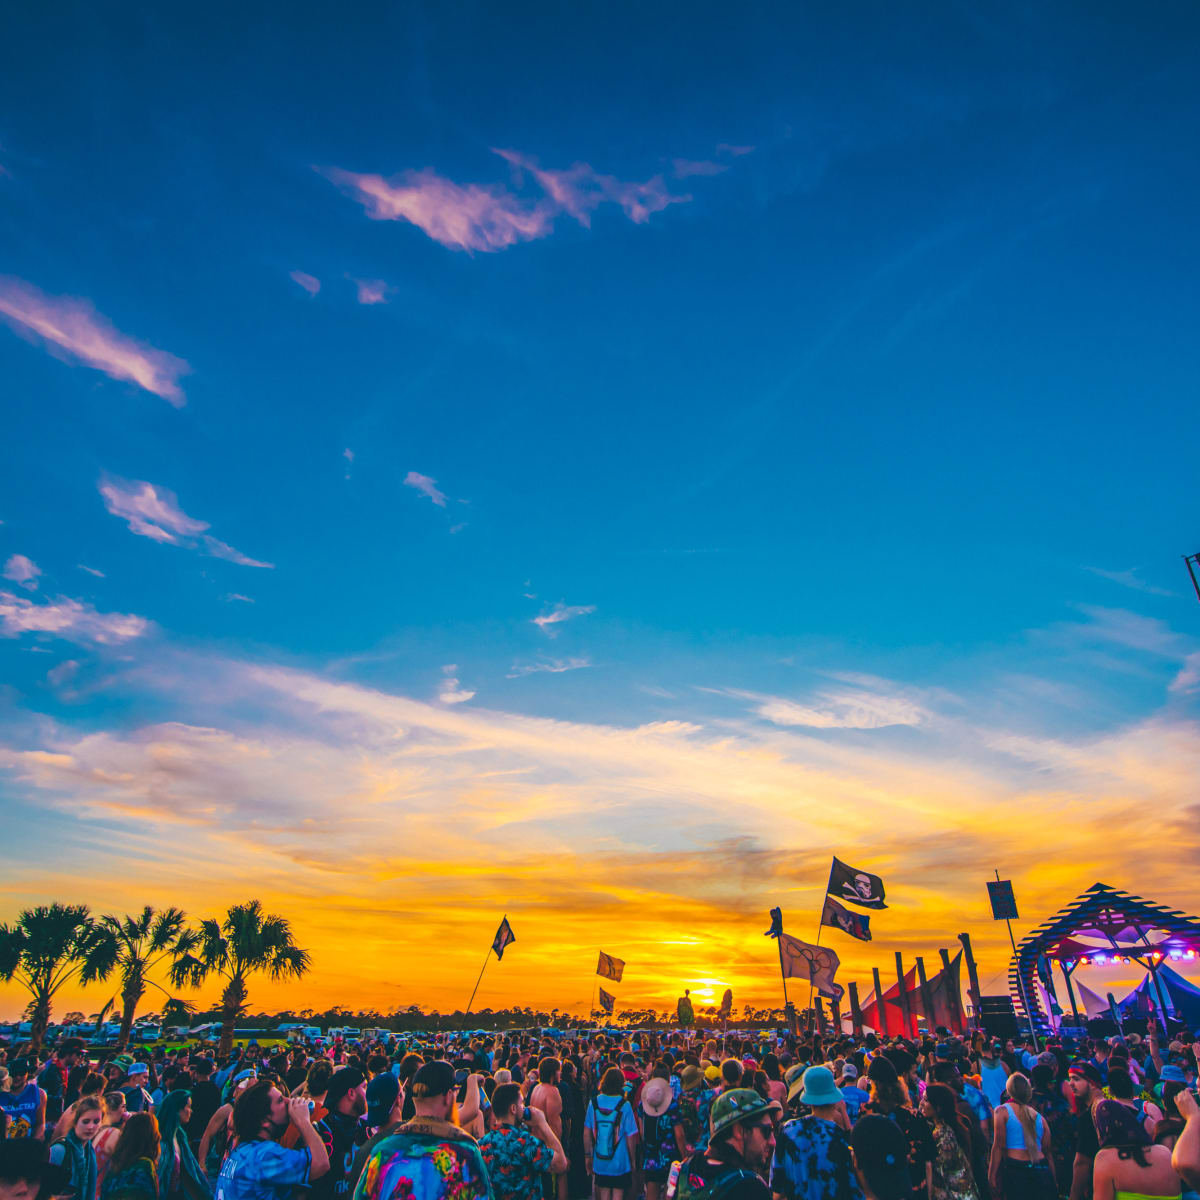 Insomniac Announces New 2021 Oceanfront House Music Festival, Day Trip -   - The Latest Electronic Dance Music News, Reviews & Artists